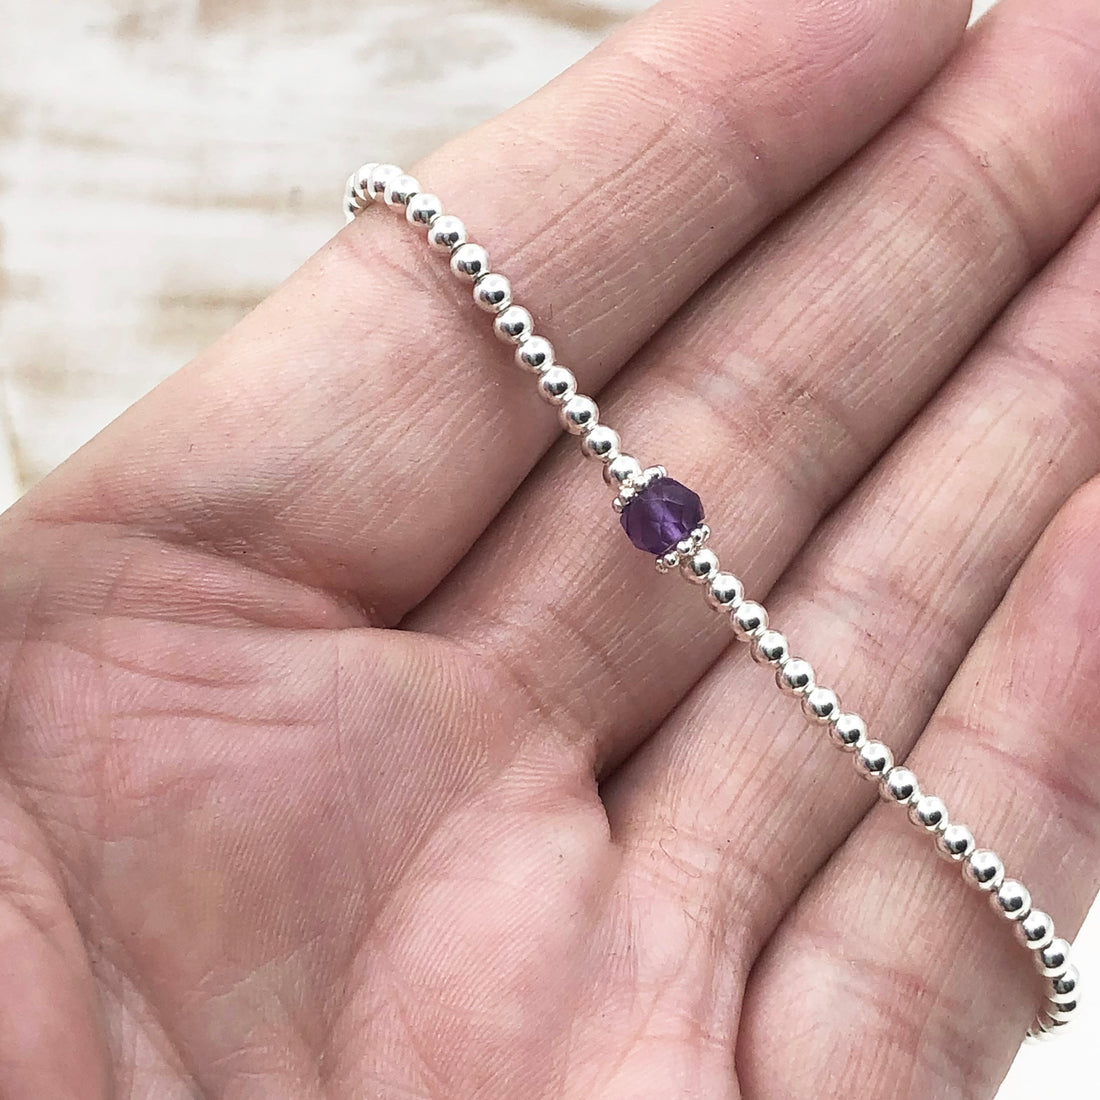 Charming Birthstone Jewelry: Natural Violet Amethyst Ring- Anniversary